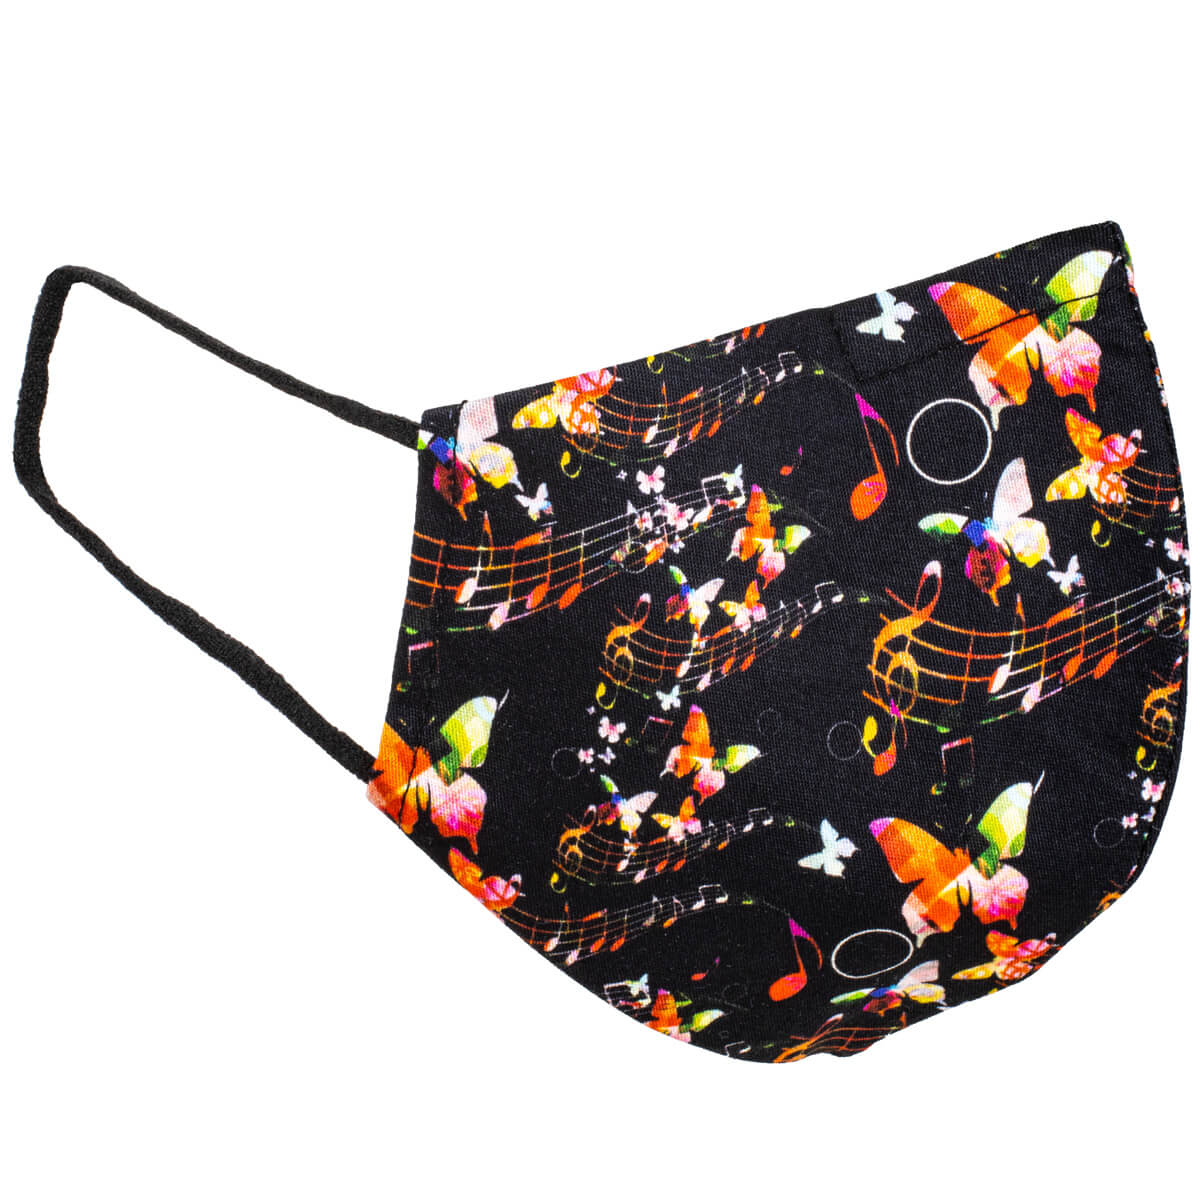 Music -themed butterfly face mask cotton 100% 1pcs